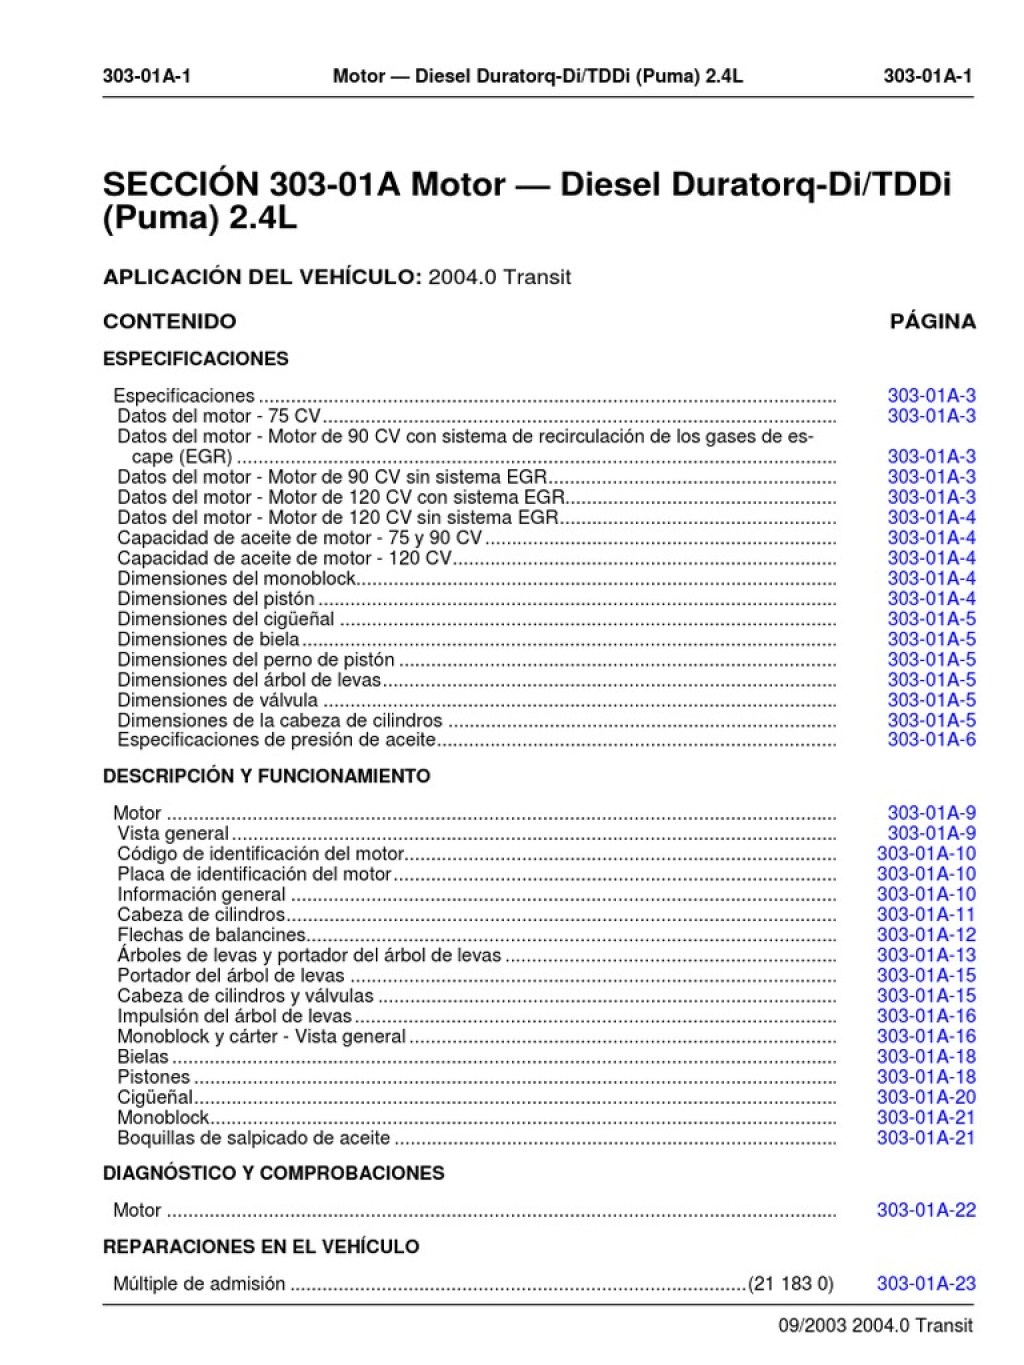 Picture of: FORD) Manual de Taller Ford Transit Motor Diesel Duratorq-DiTDDi